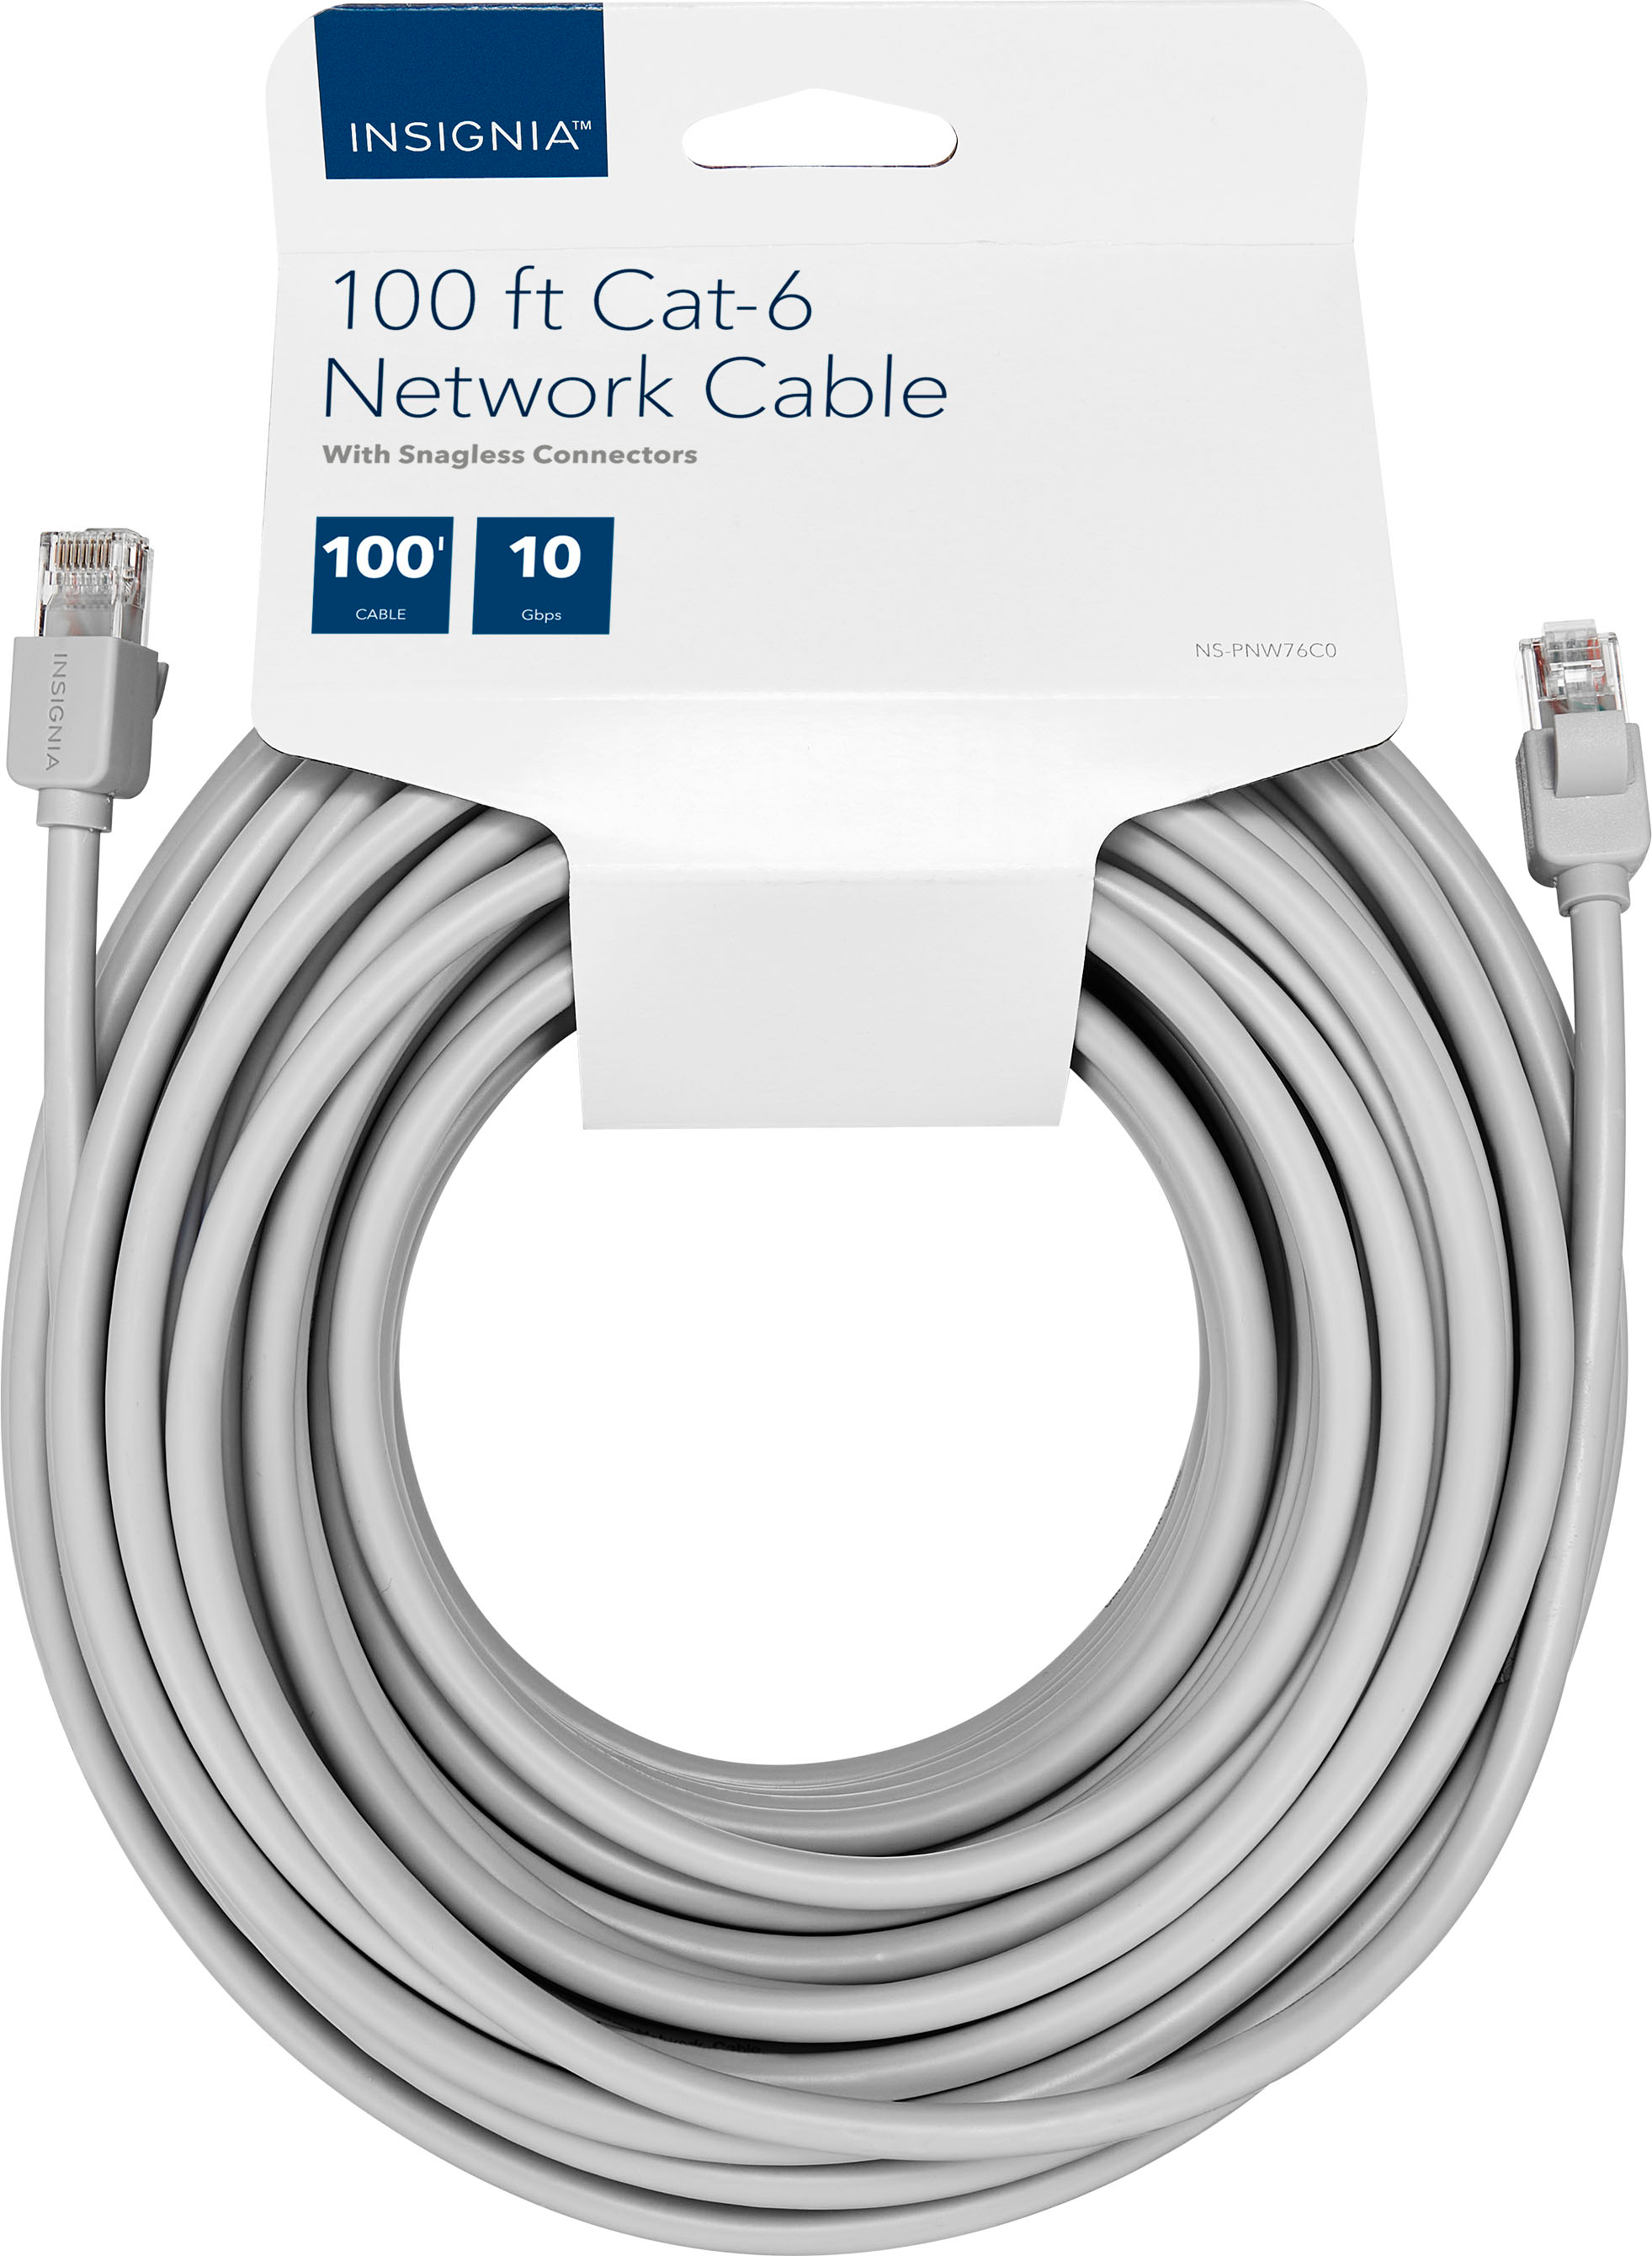 Cat 7 - Ethernet Cables - Cables - The Home Depot